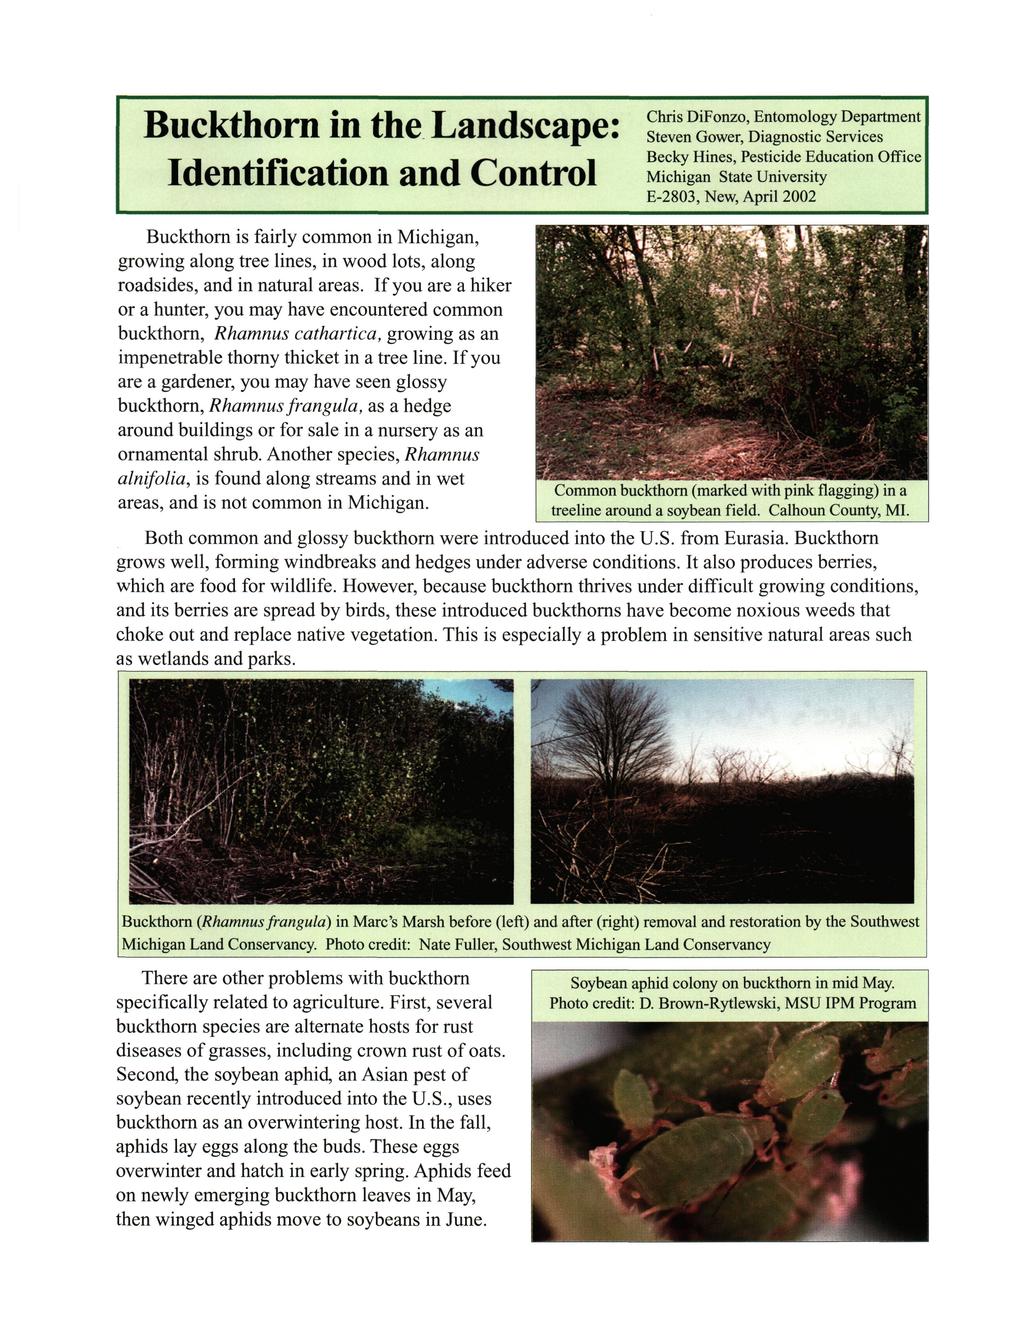 Buckthorn in the Landscape: Identification and Control Buckthorn is fairly common in Michigan, growing along tree lines, in wood lots, along roadsides, and in natural areas.